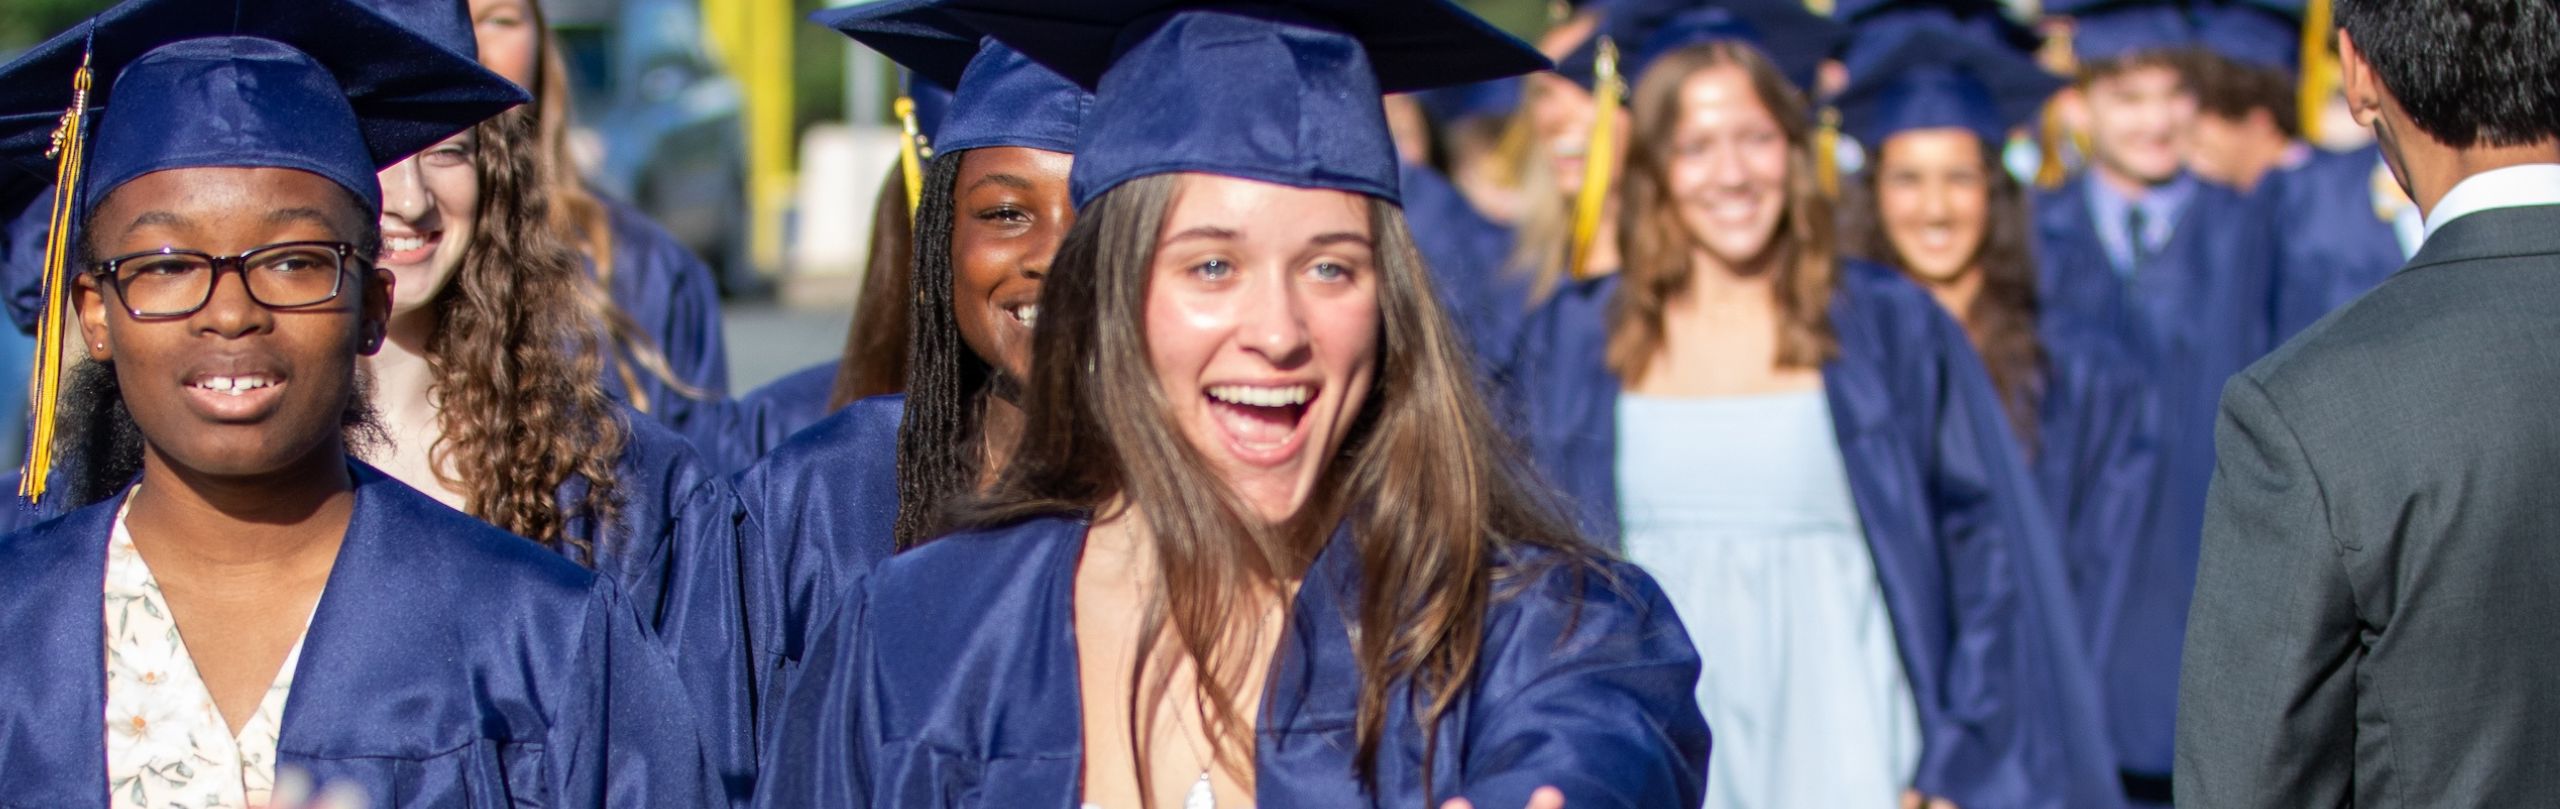 A female graduate in a cap and gown reaches out toward someone on the other side of the camera